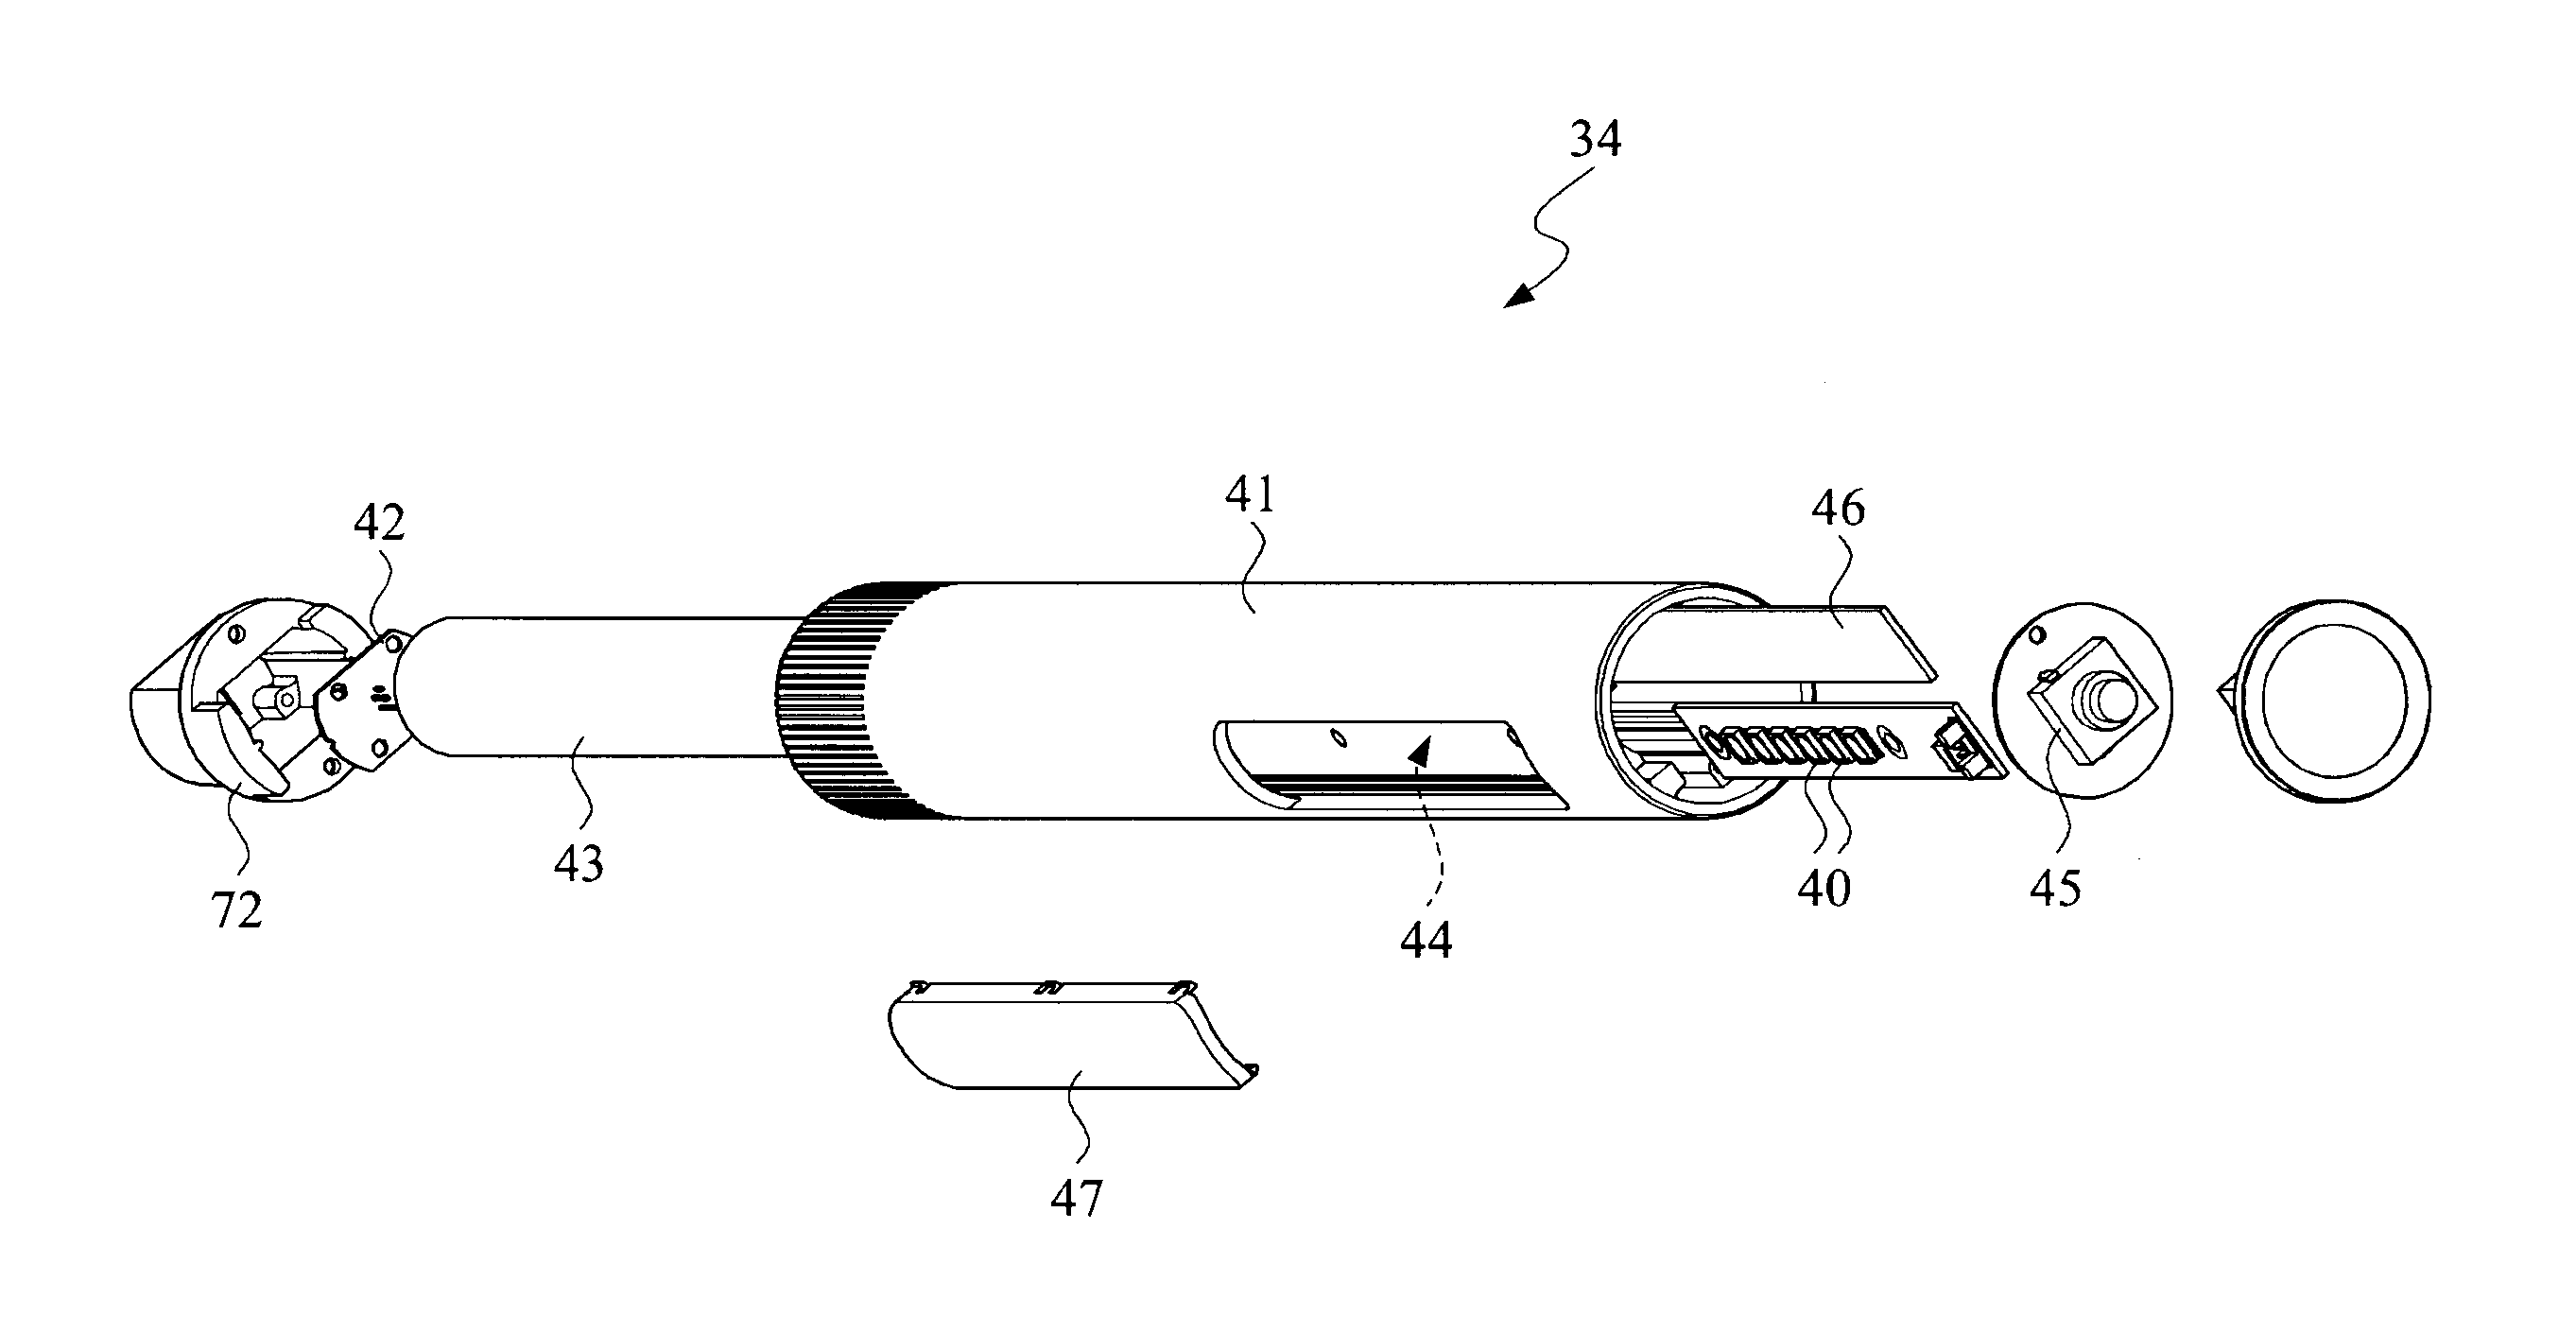 Lamp assembly including a lamp device detachable from a stand unit for serving as a torch light